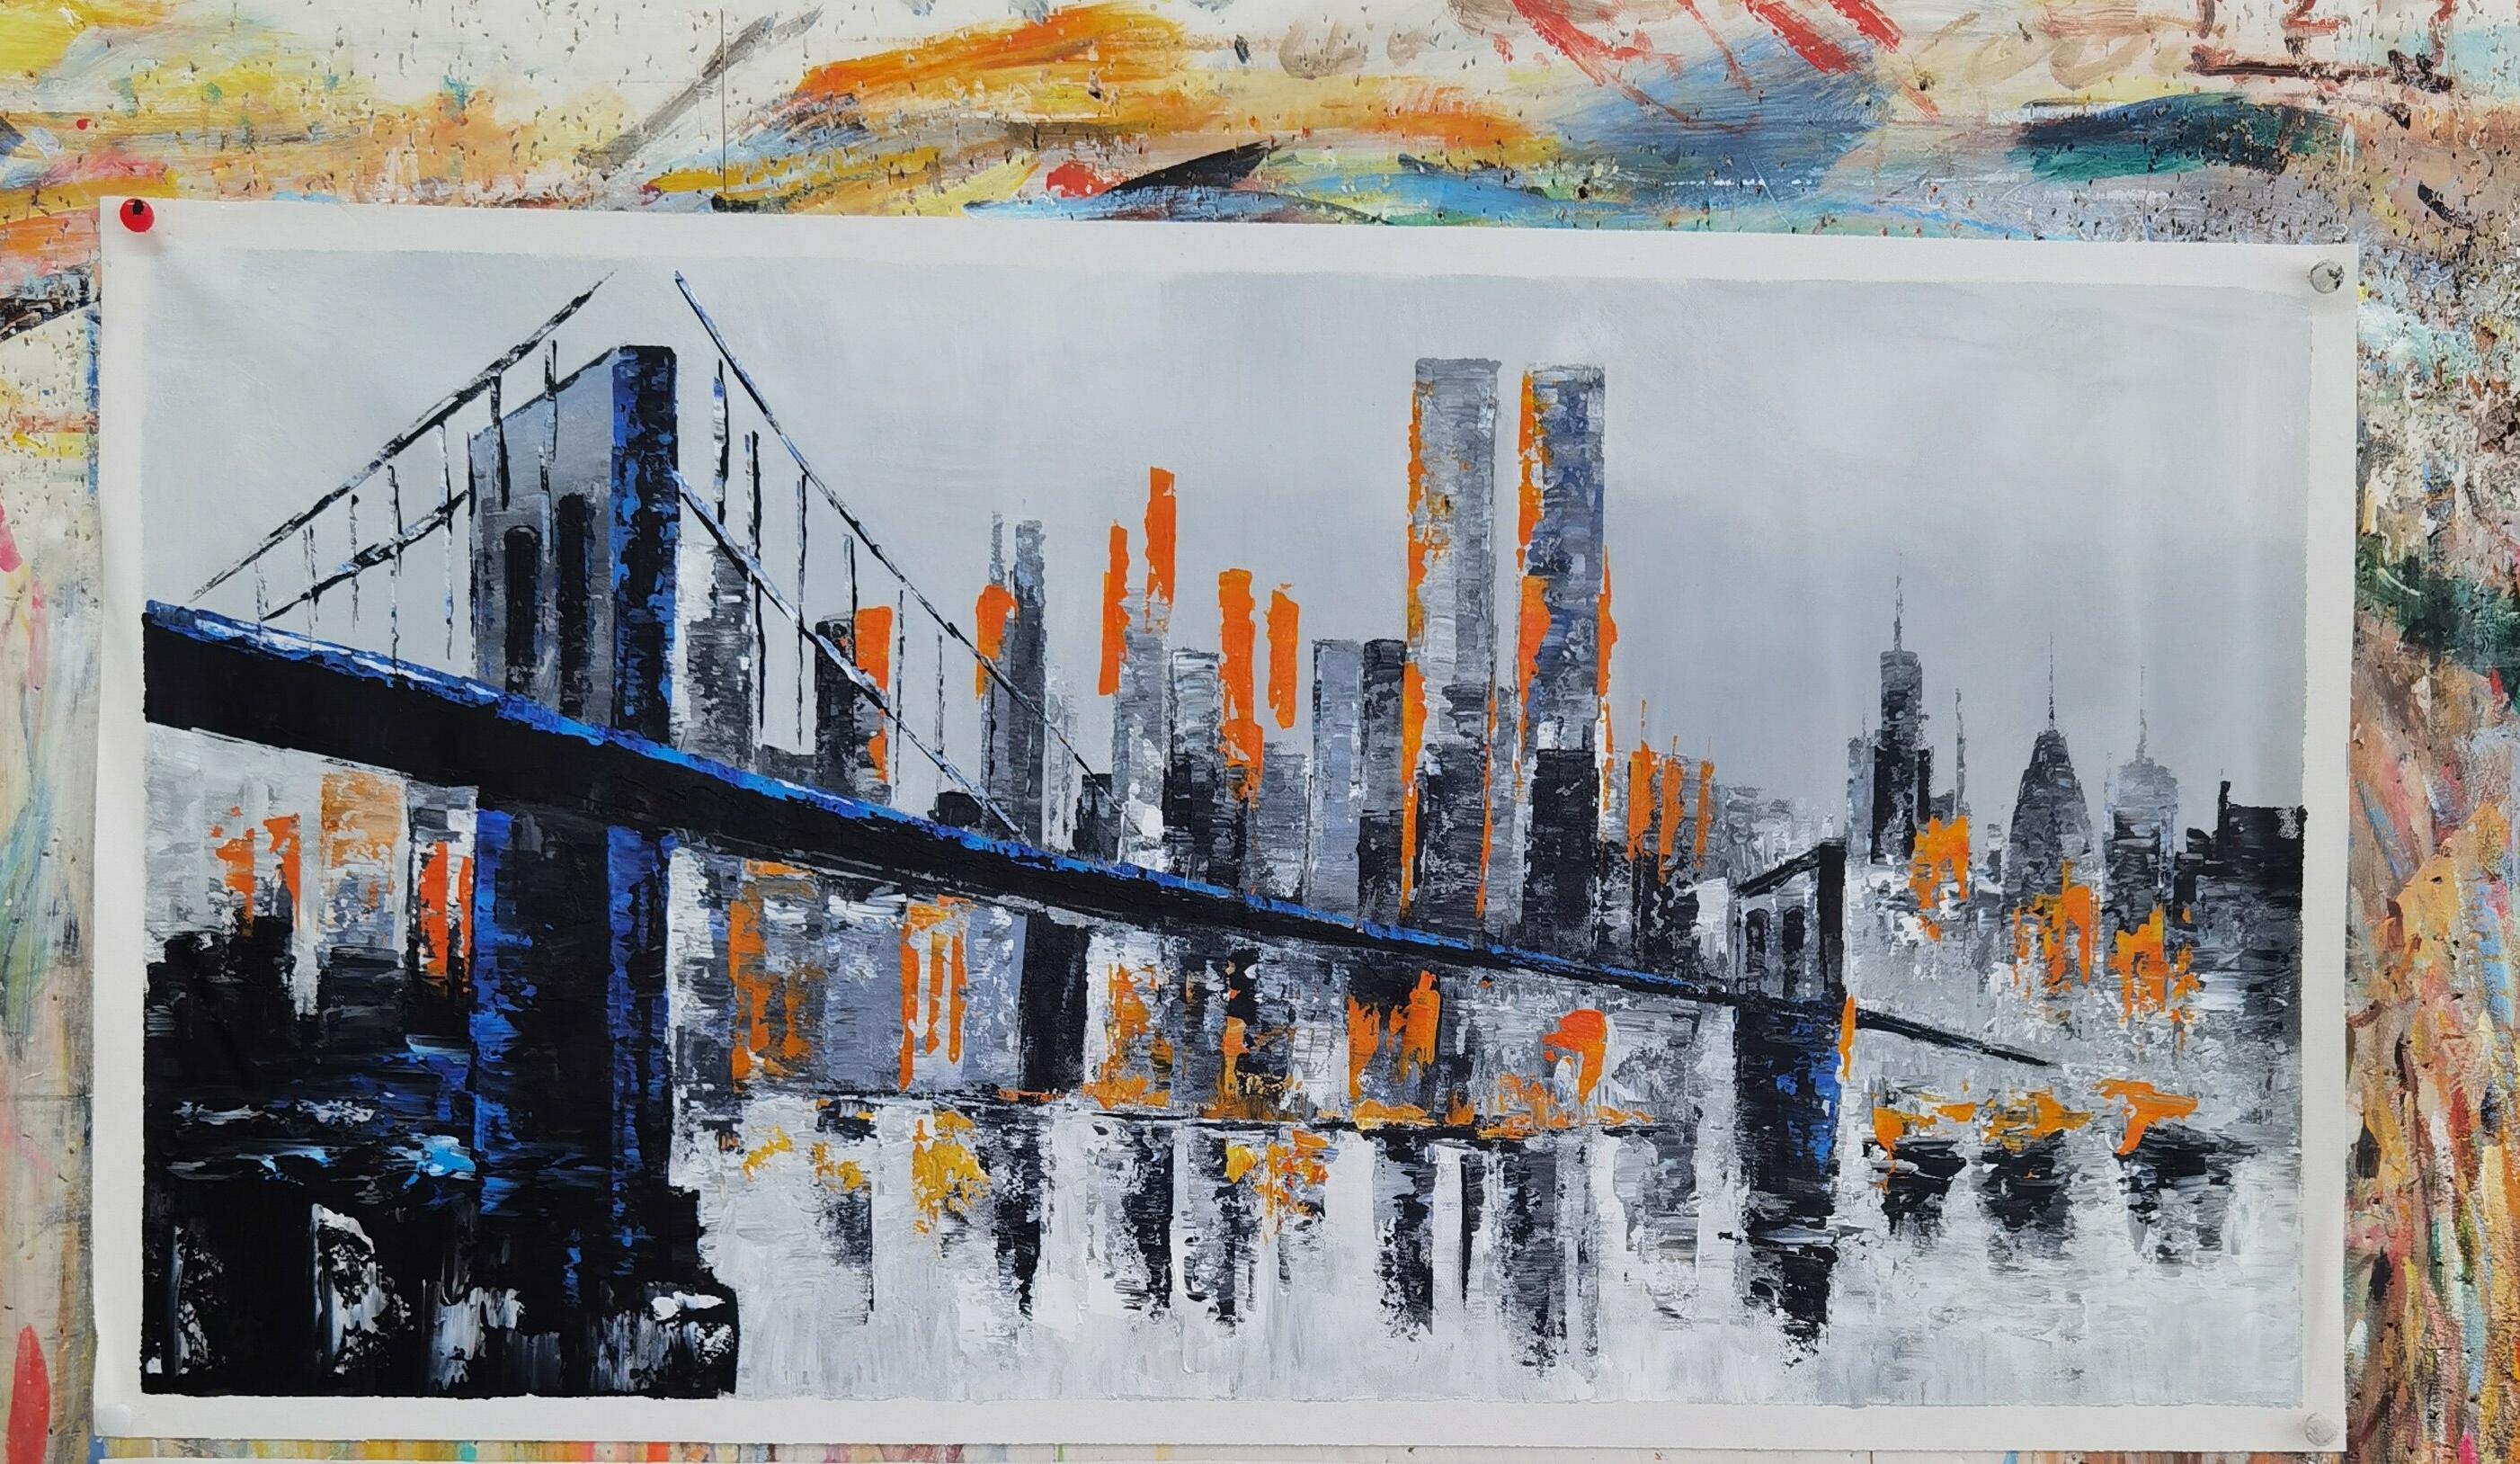 BRIDGE AT NIGHT - Abstract Expressionist Painting by Unknown